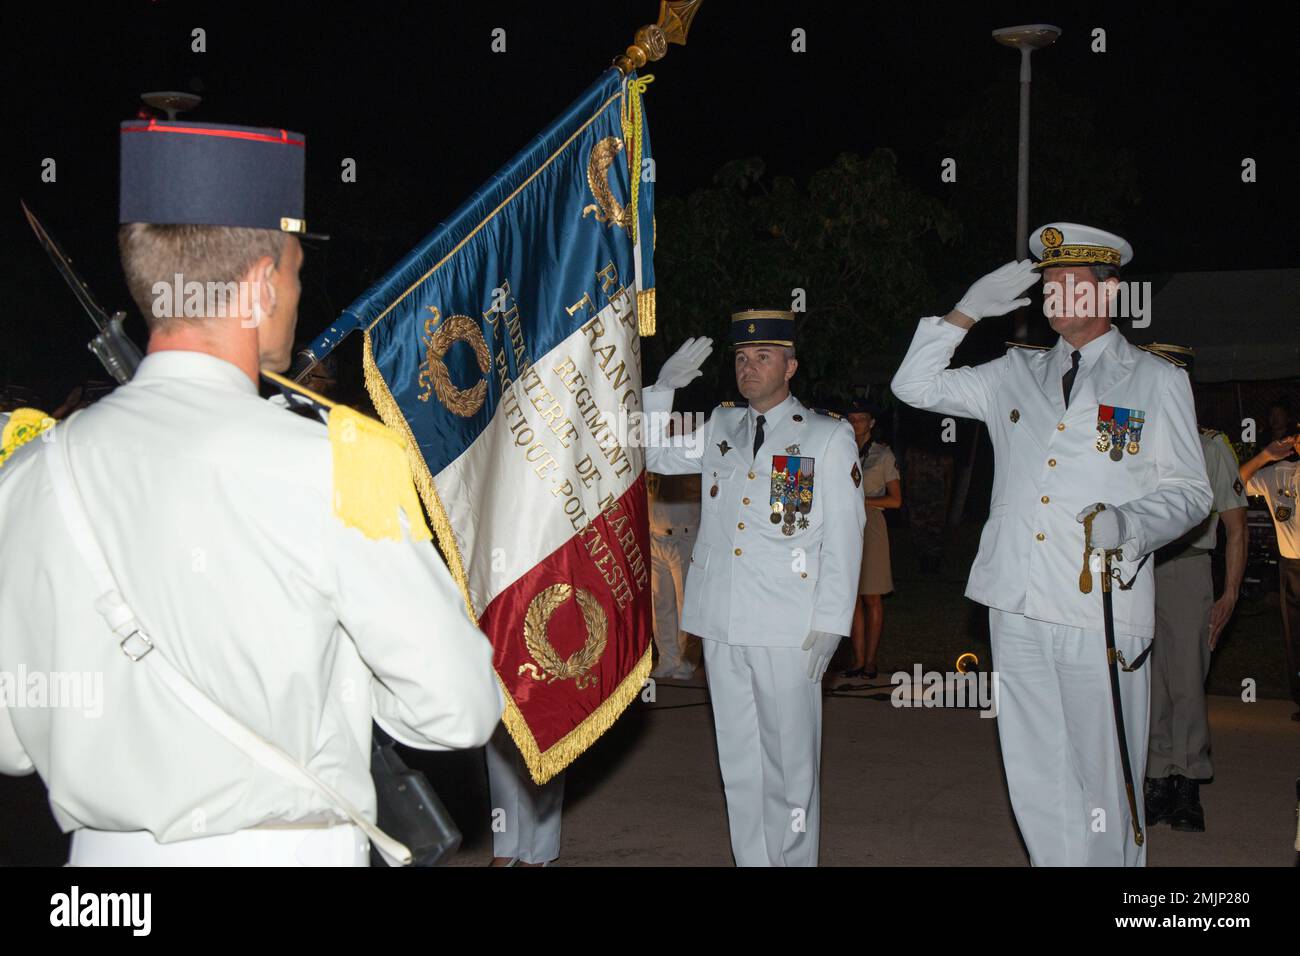 French Navy Rear Adm. Geoffroy d'Andigne, right, joint commander of the French Armed Forces in the Asia-Pacific, French Armed Forces in French Polynesia, renders a salute during the playing of the French National Anthem during the Bazeilles Day Ceremony in Pirae, Tahiti, French Polynesia, Aug. 31, 2022. The ceremony honored the events of the Franco-Prussian War in 1870, when French Marines stood up to a force of Bavarians who outnumbered the French 10 to one. Taking place in the French Village of Bazeilles, the battle is considered one of the first occurrences of urban warfare. Stock Photo